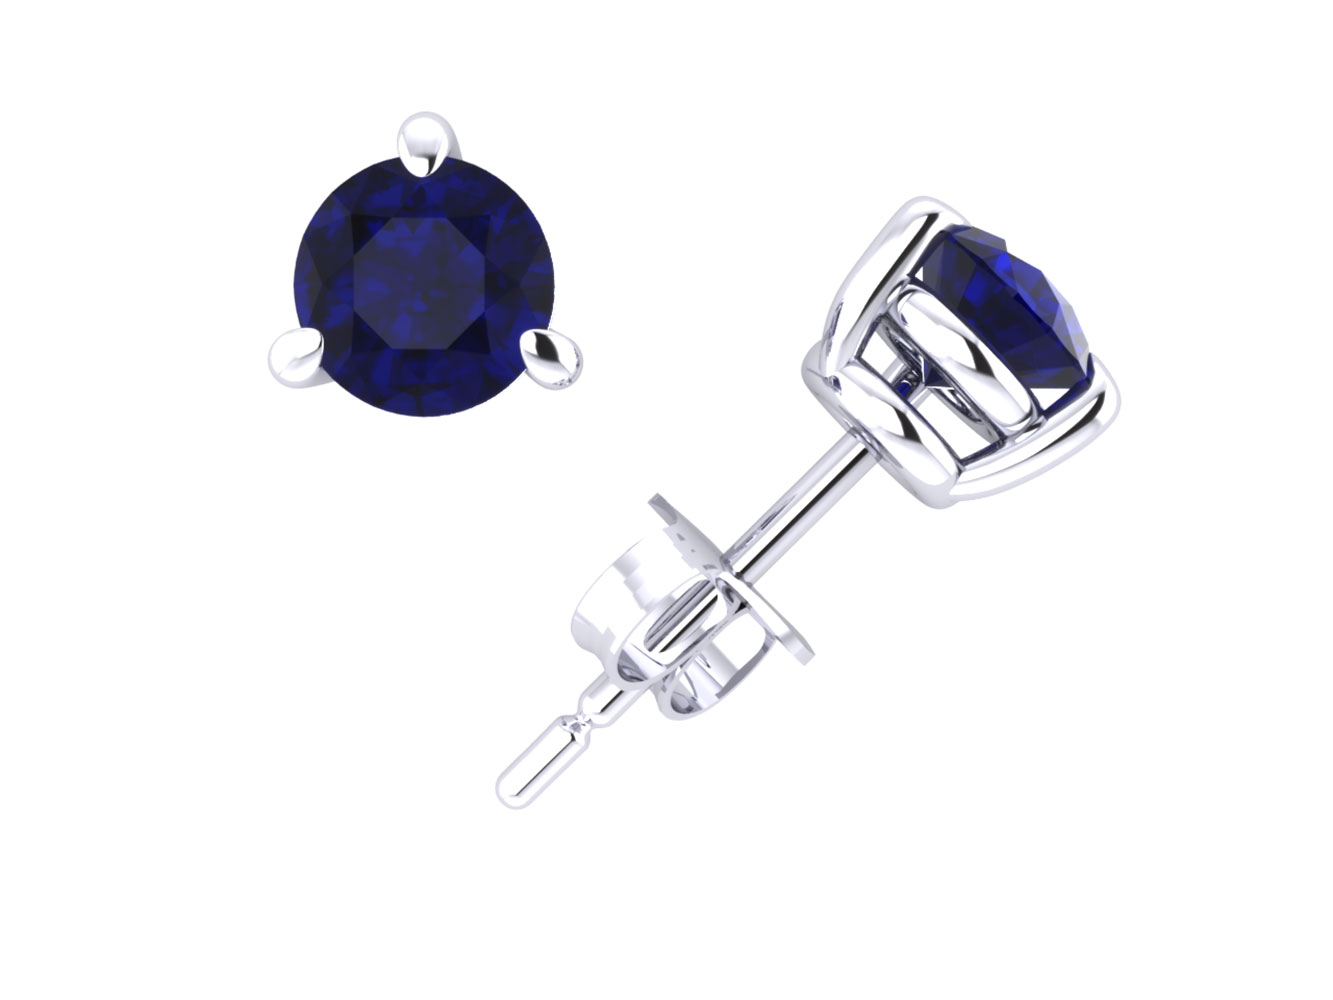 Jewel We Sell 2Carat Round Cut Blue Sapphire Basket Stud Earrings 14k White or Yellow Gold 3Prong AAA Quality